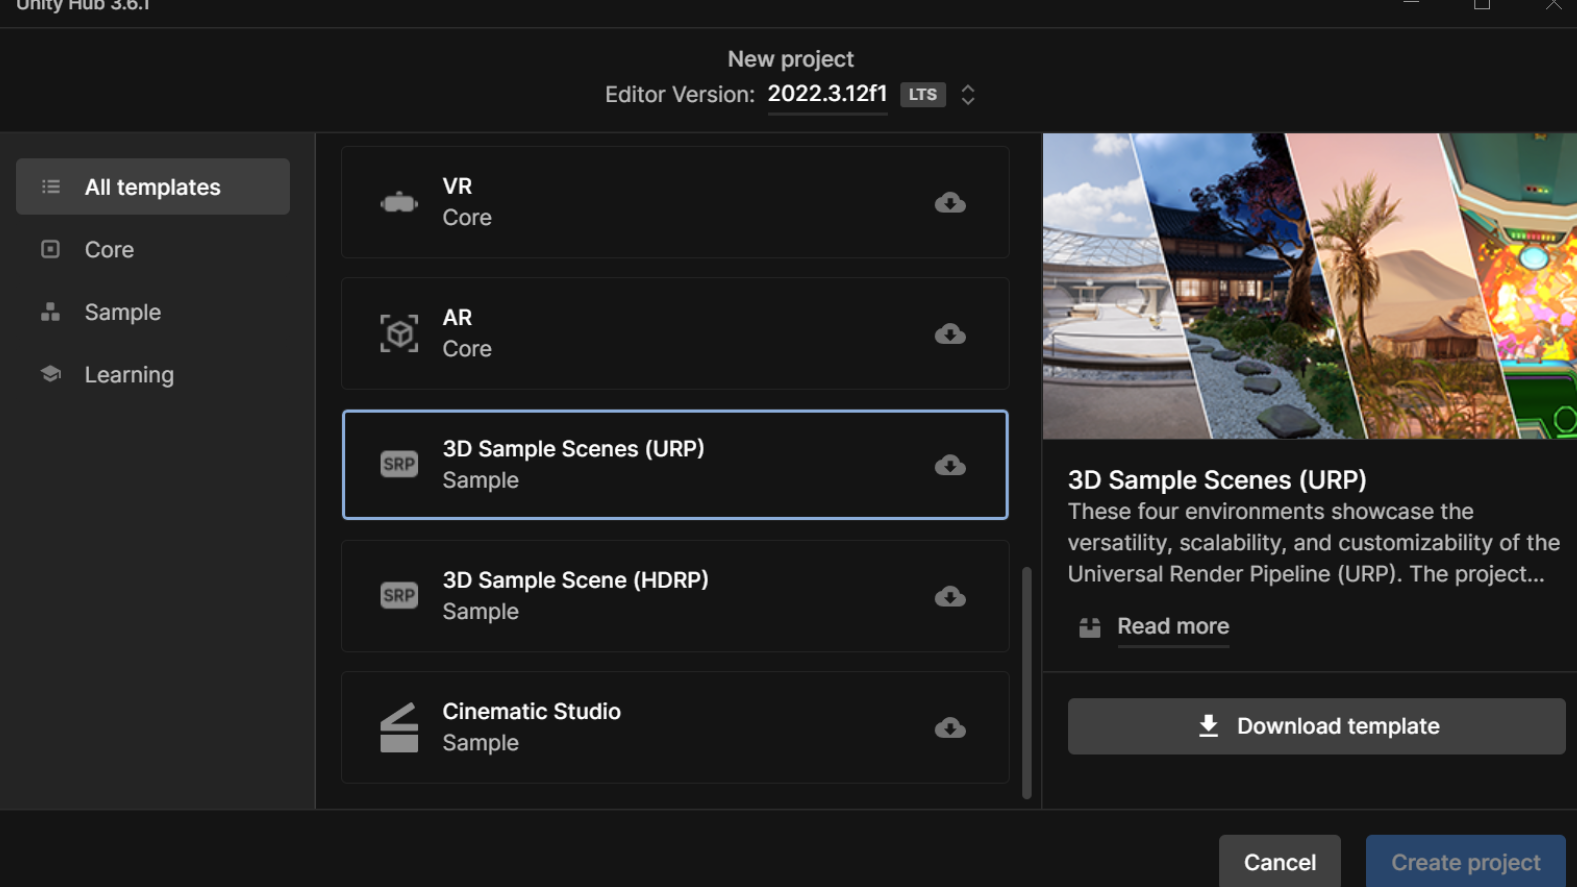 View of the URP 3D Sample download window in the Unity Hub